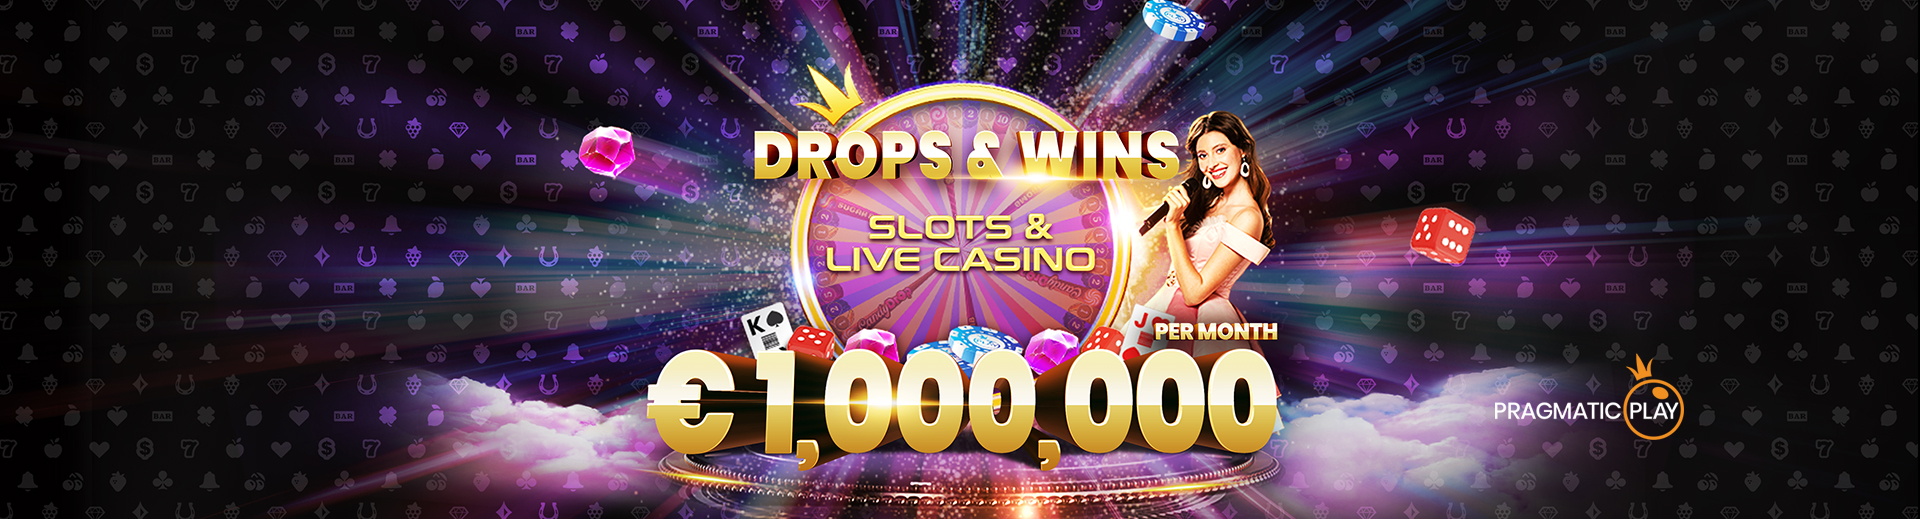 14792-Drops-and-Wins-2022-production-casino-banner